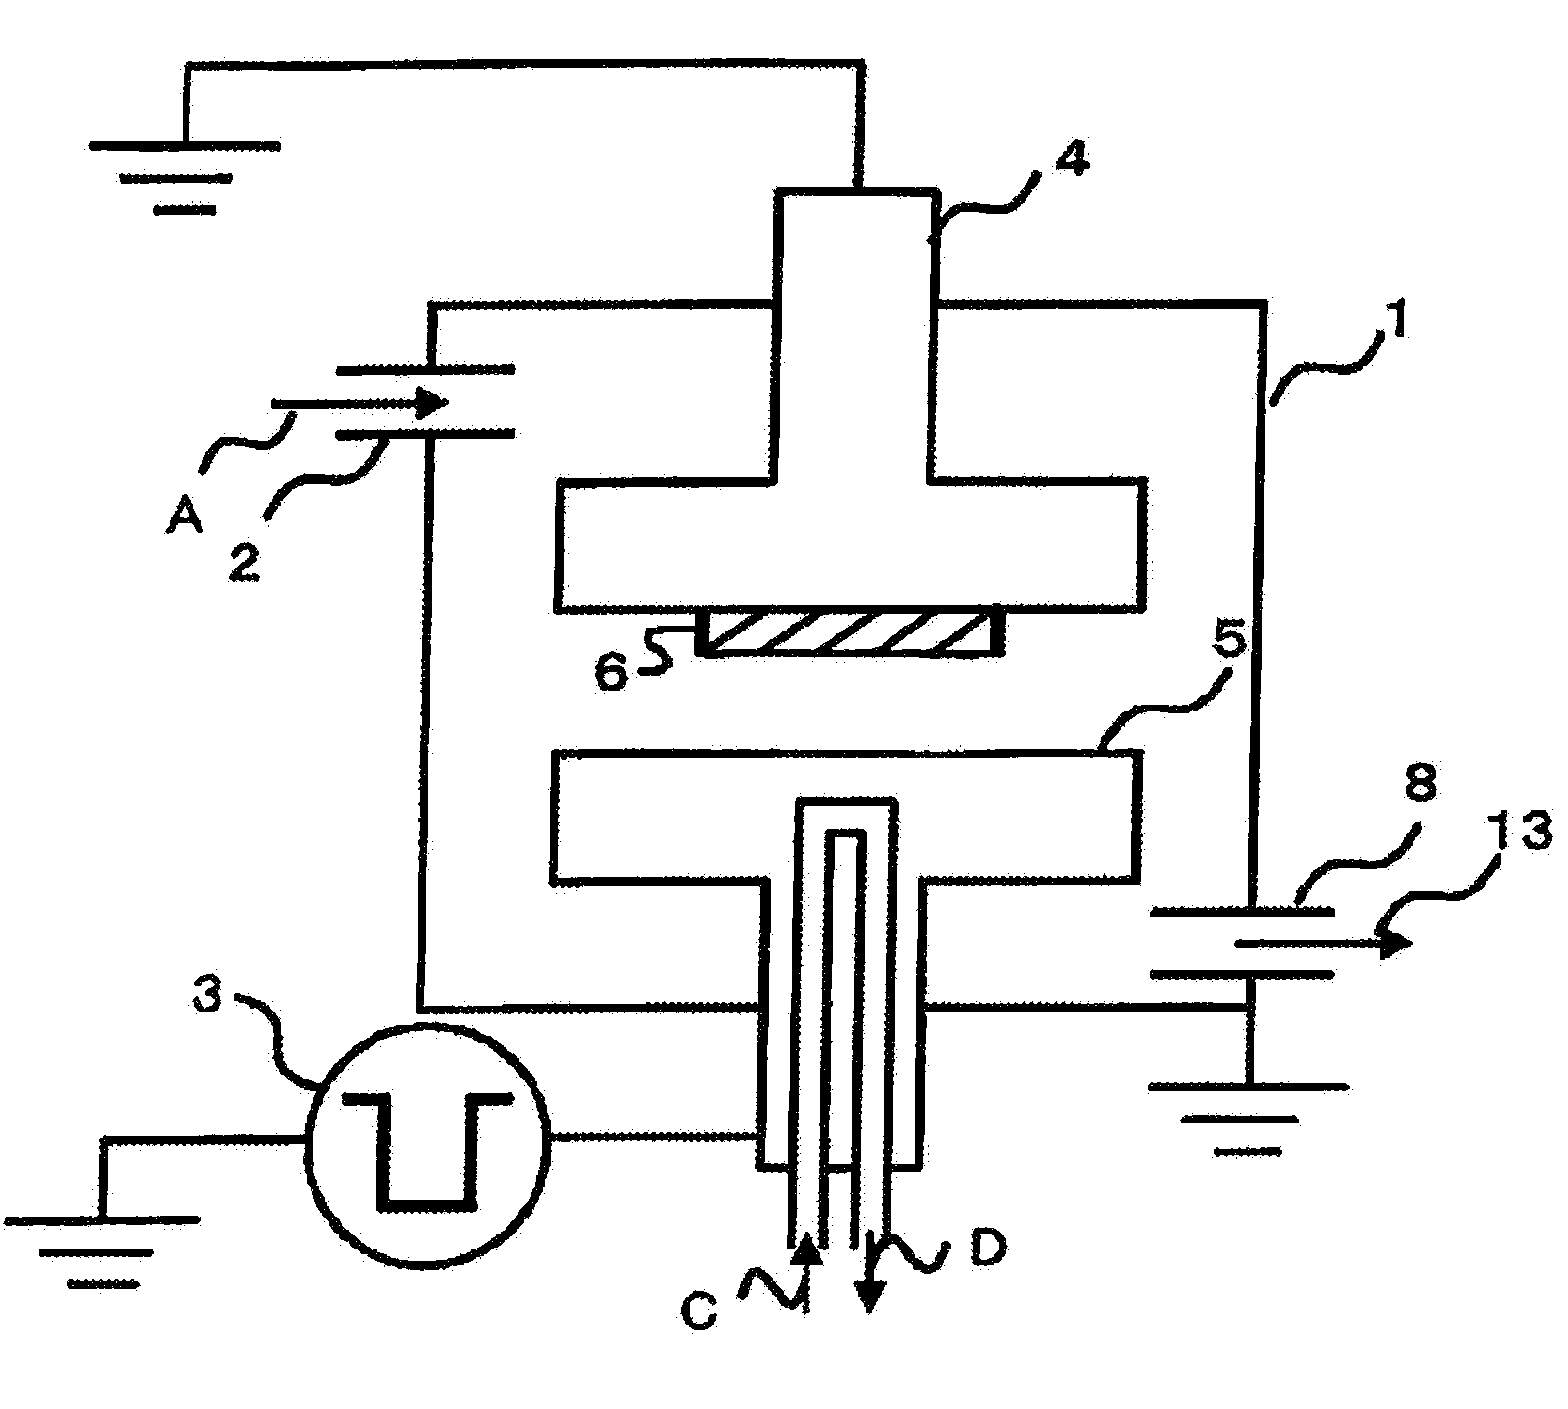 Method for reforming carbonaceous materials